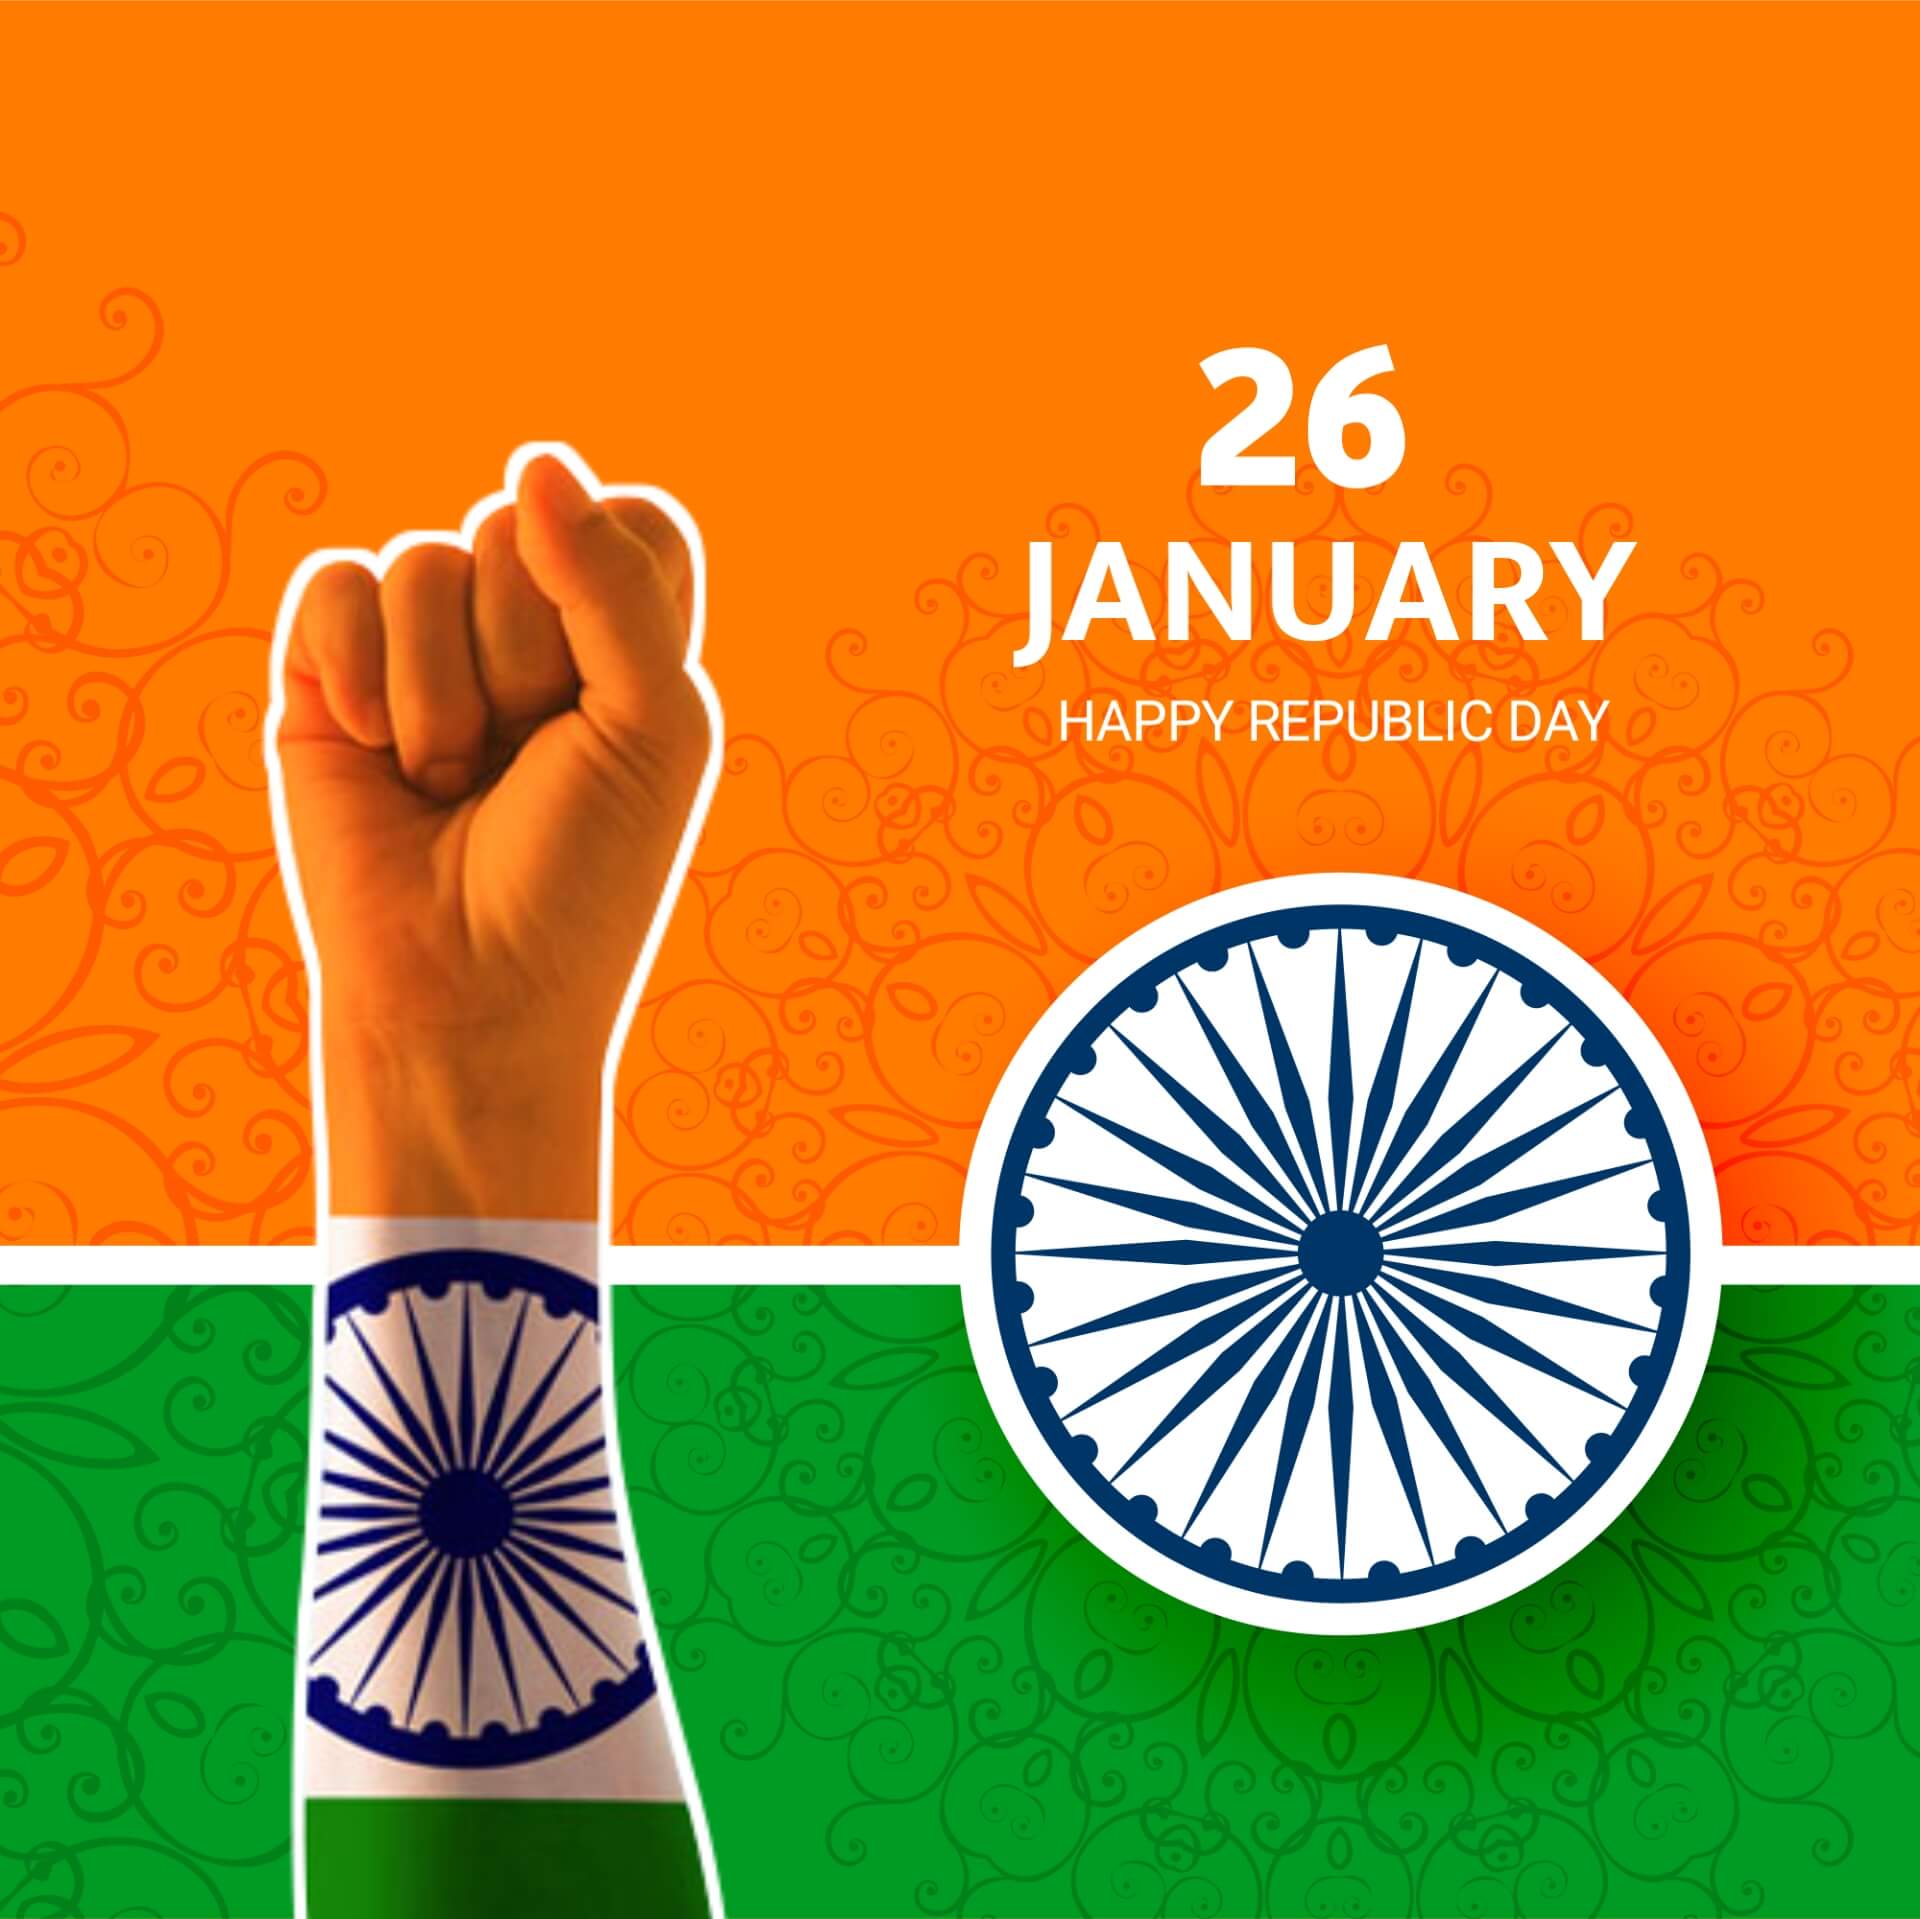 Republic Day Photo Messages